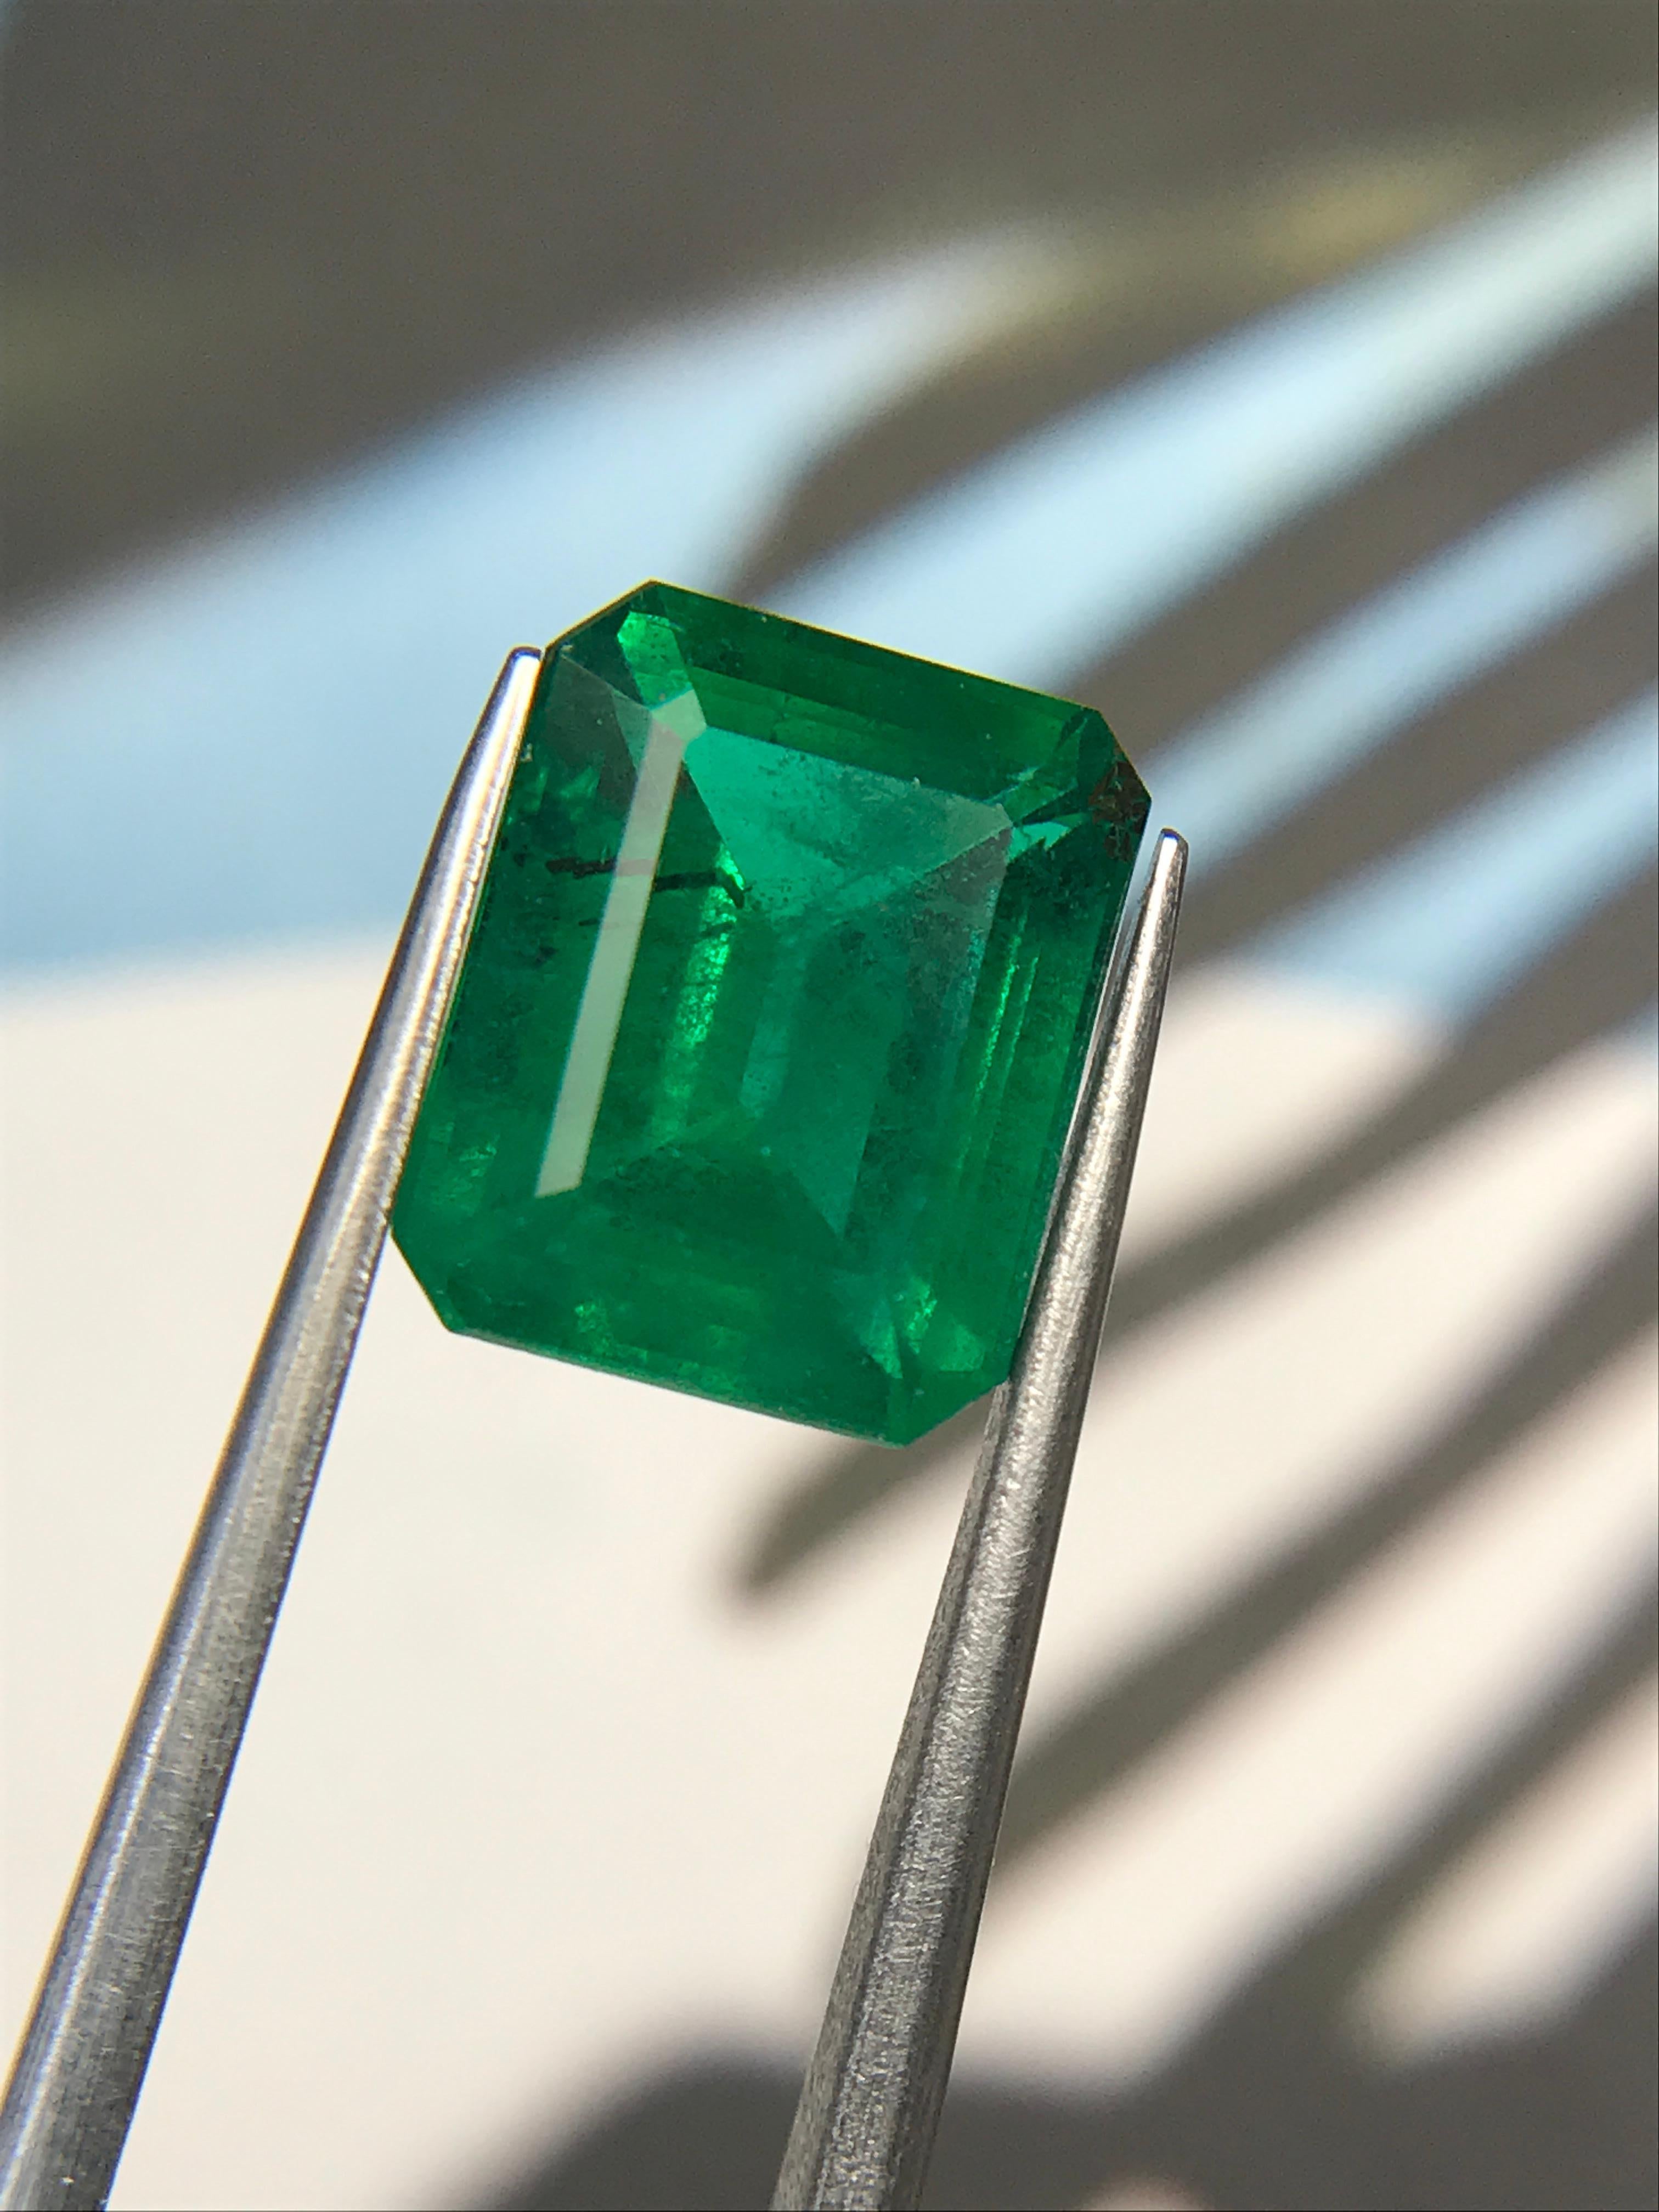 Vibrant 3.83 carat natural octagon emerald with minor oil treatment. This beautiful stone would be the perfect fit for a lovely ring or pendant to add a splash of colour to your life.

We specialise in colour gemstones and offer a bespoke jewellery